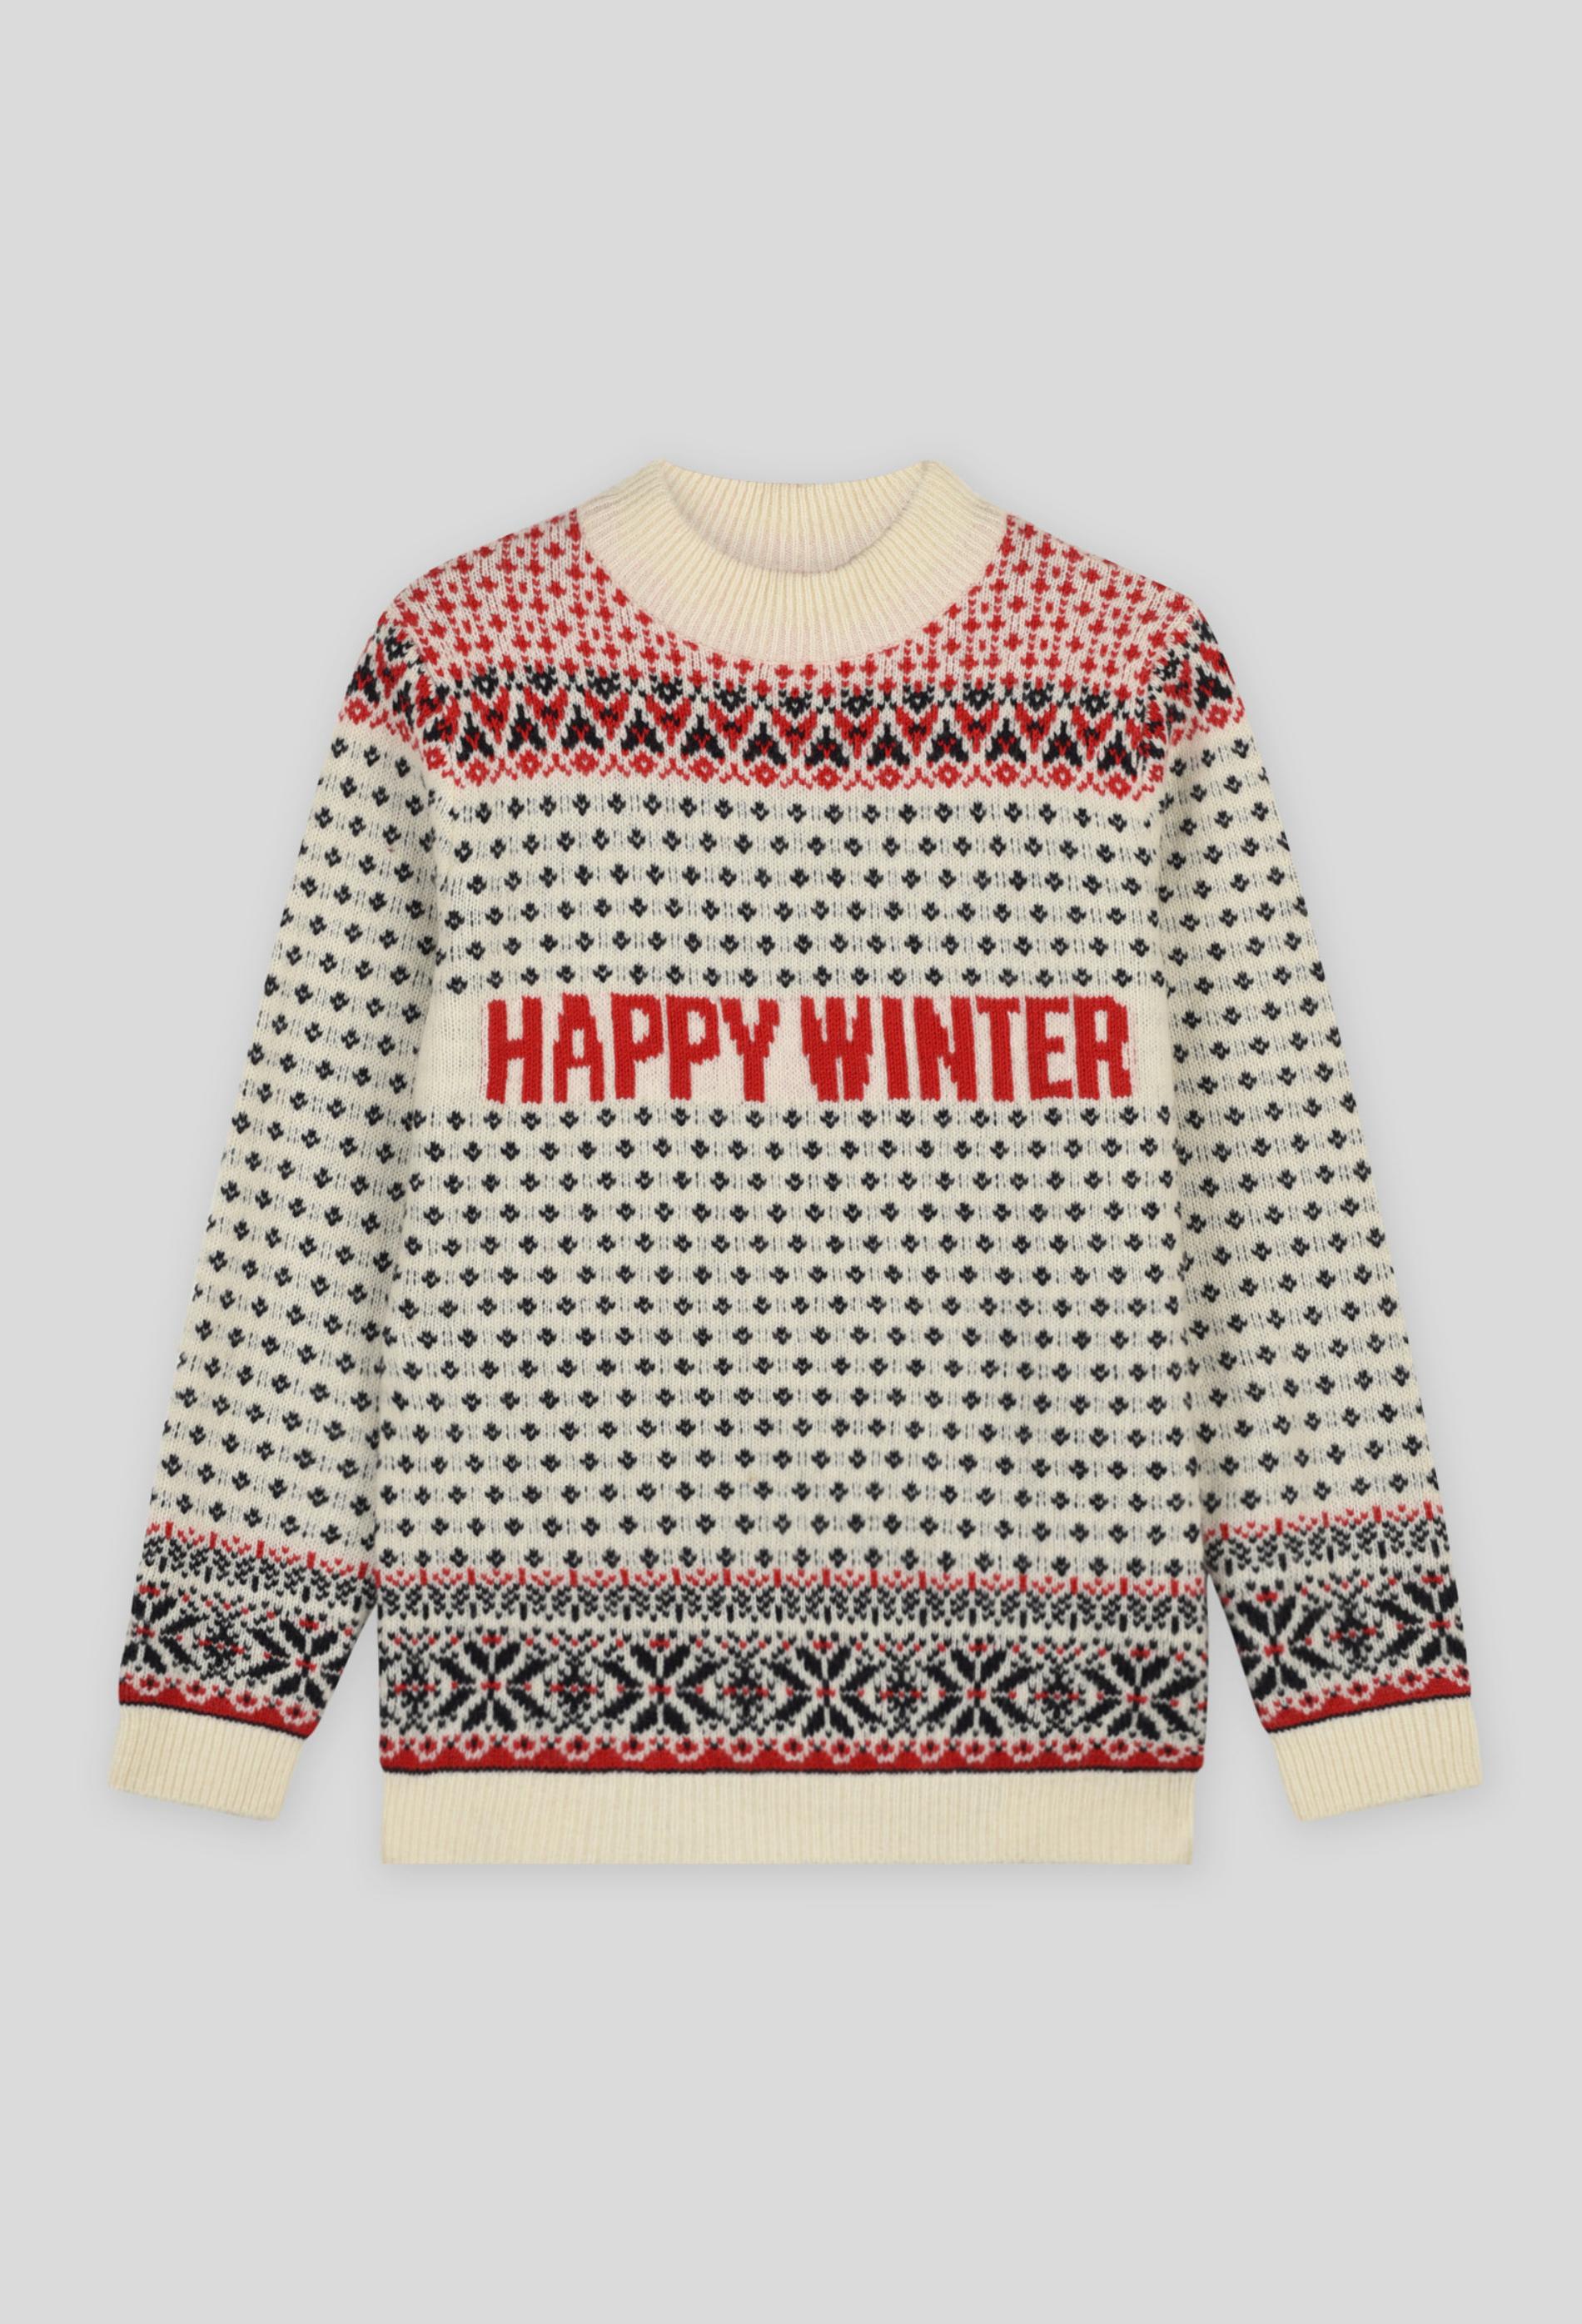 PULL JACQUARD MAILLE HAPPY WINTER 4 ans ecru